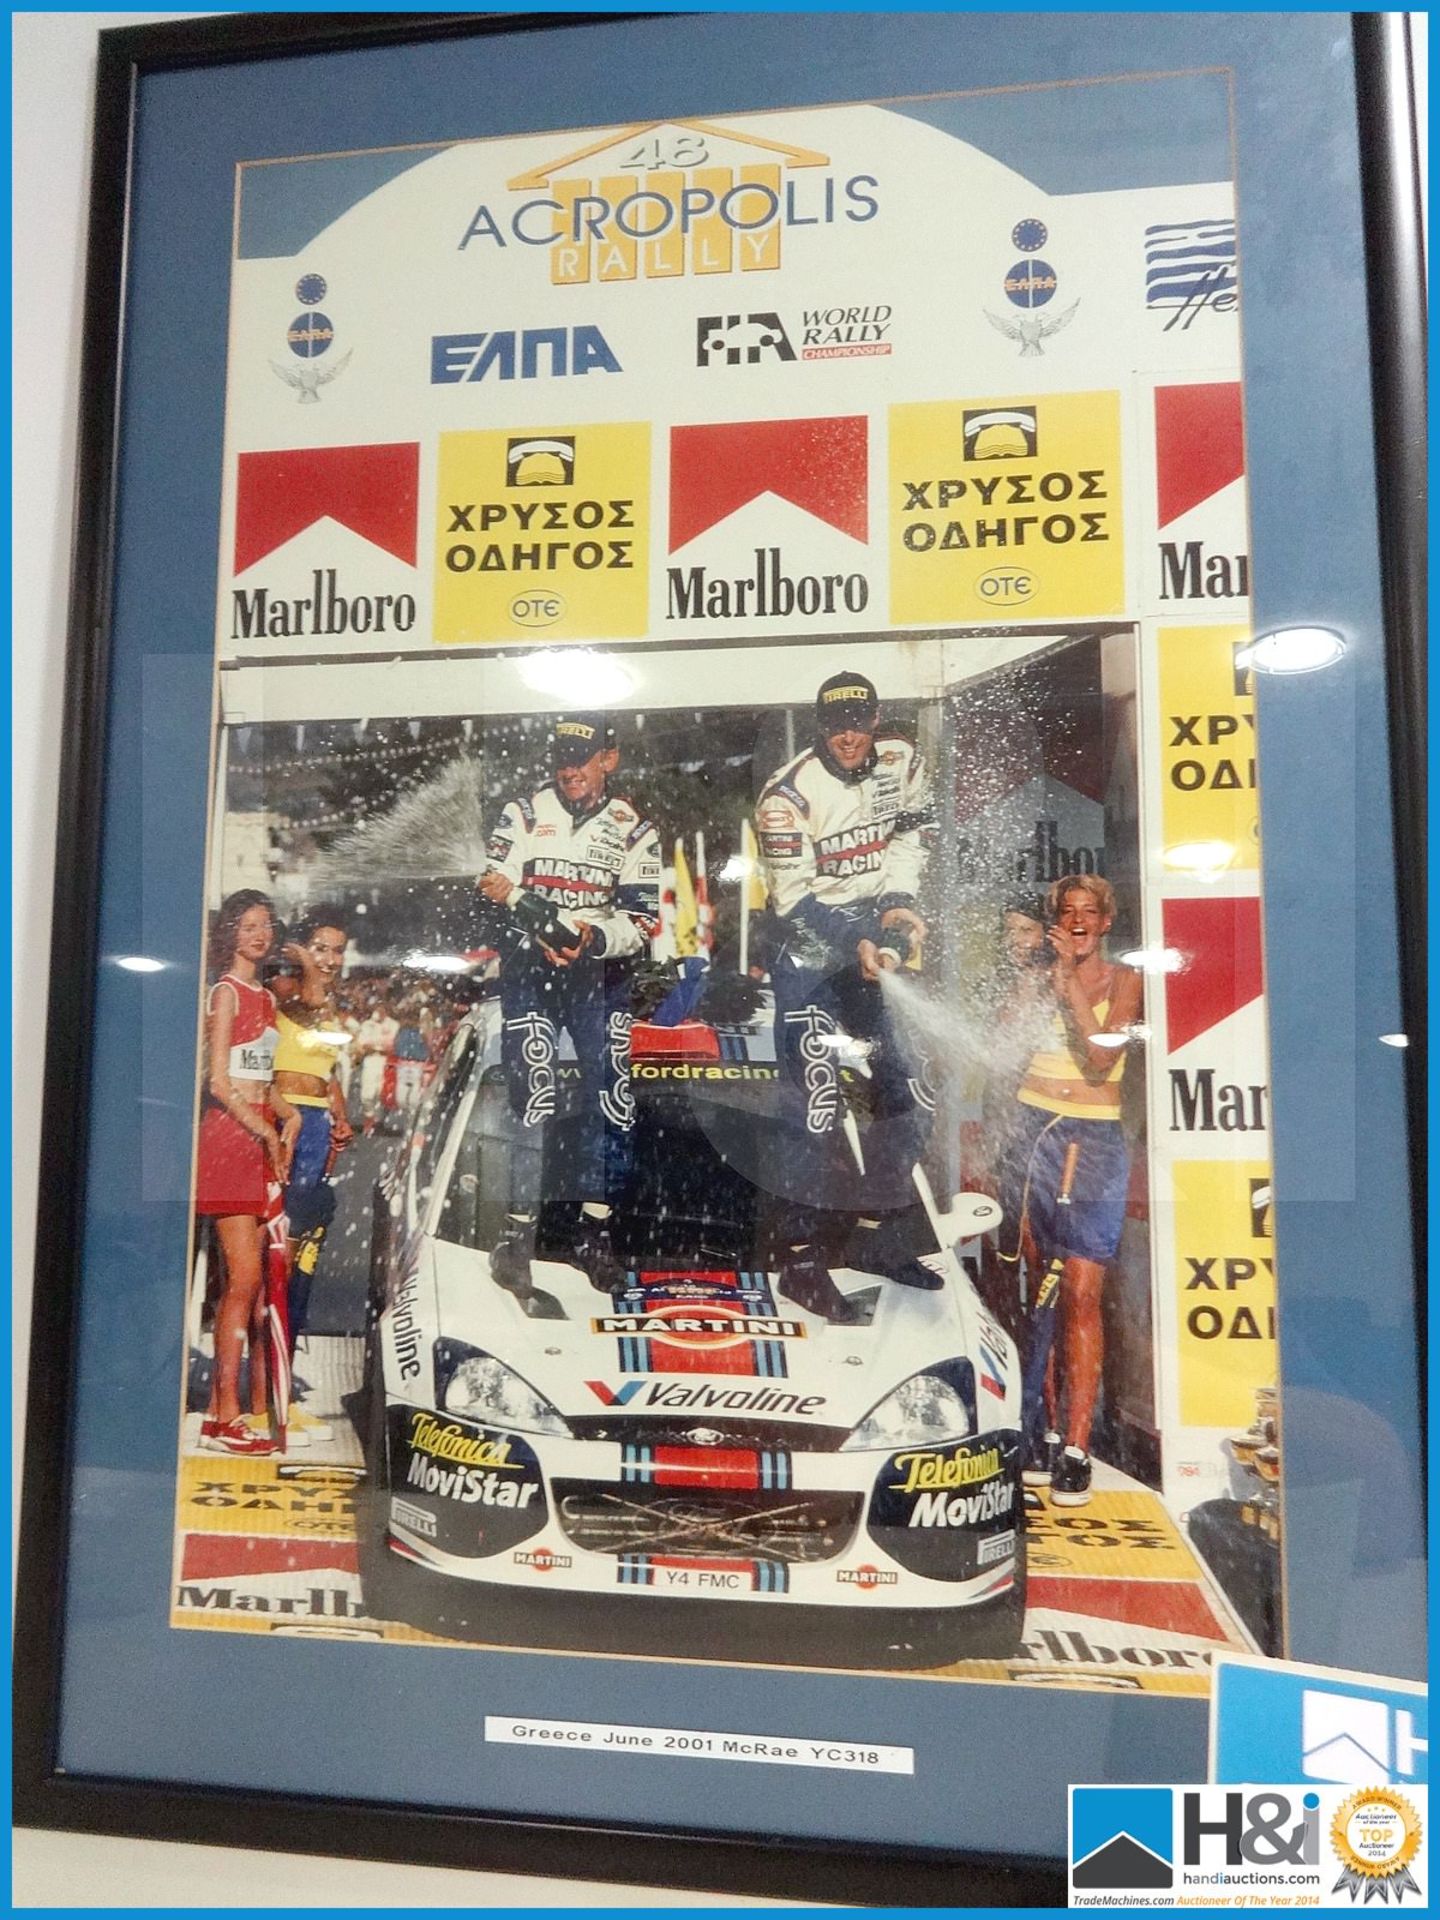 Framed Colin McRae Acropolis Rally podium win photograph. Greece June 2001 engine number YC318. Neve - Image 4 of 4